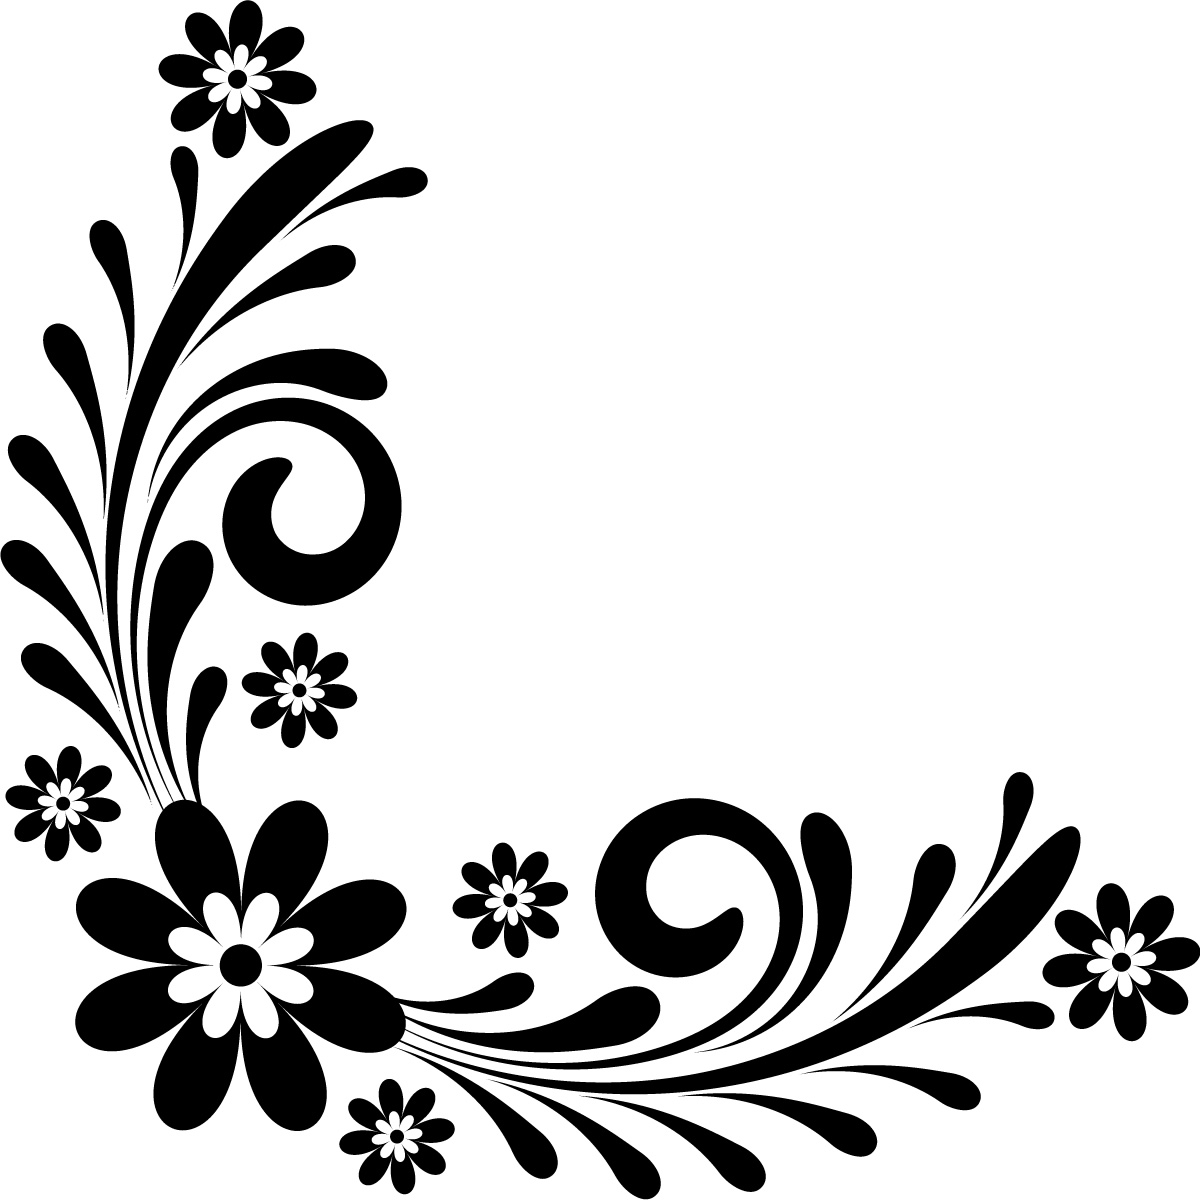 Border Design Black And White Clipart Free download on